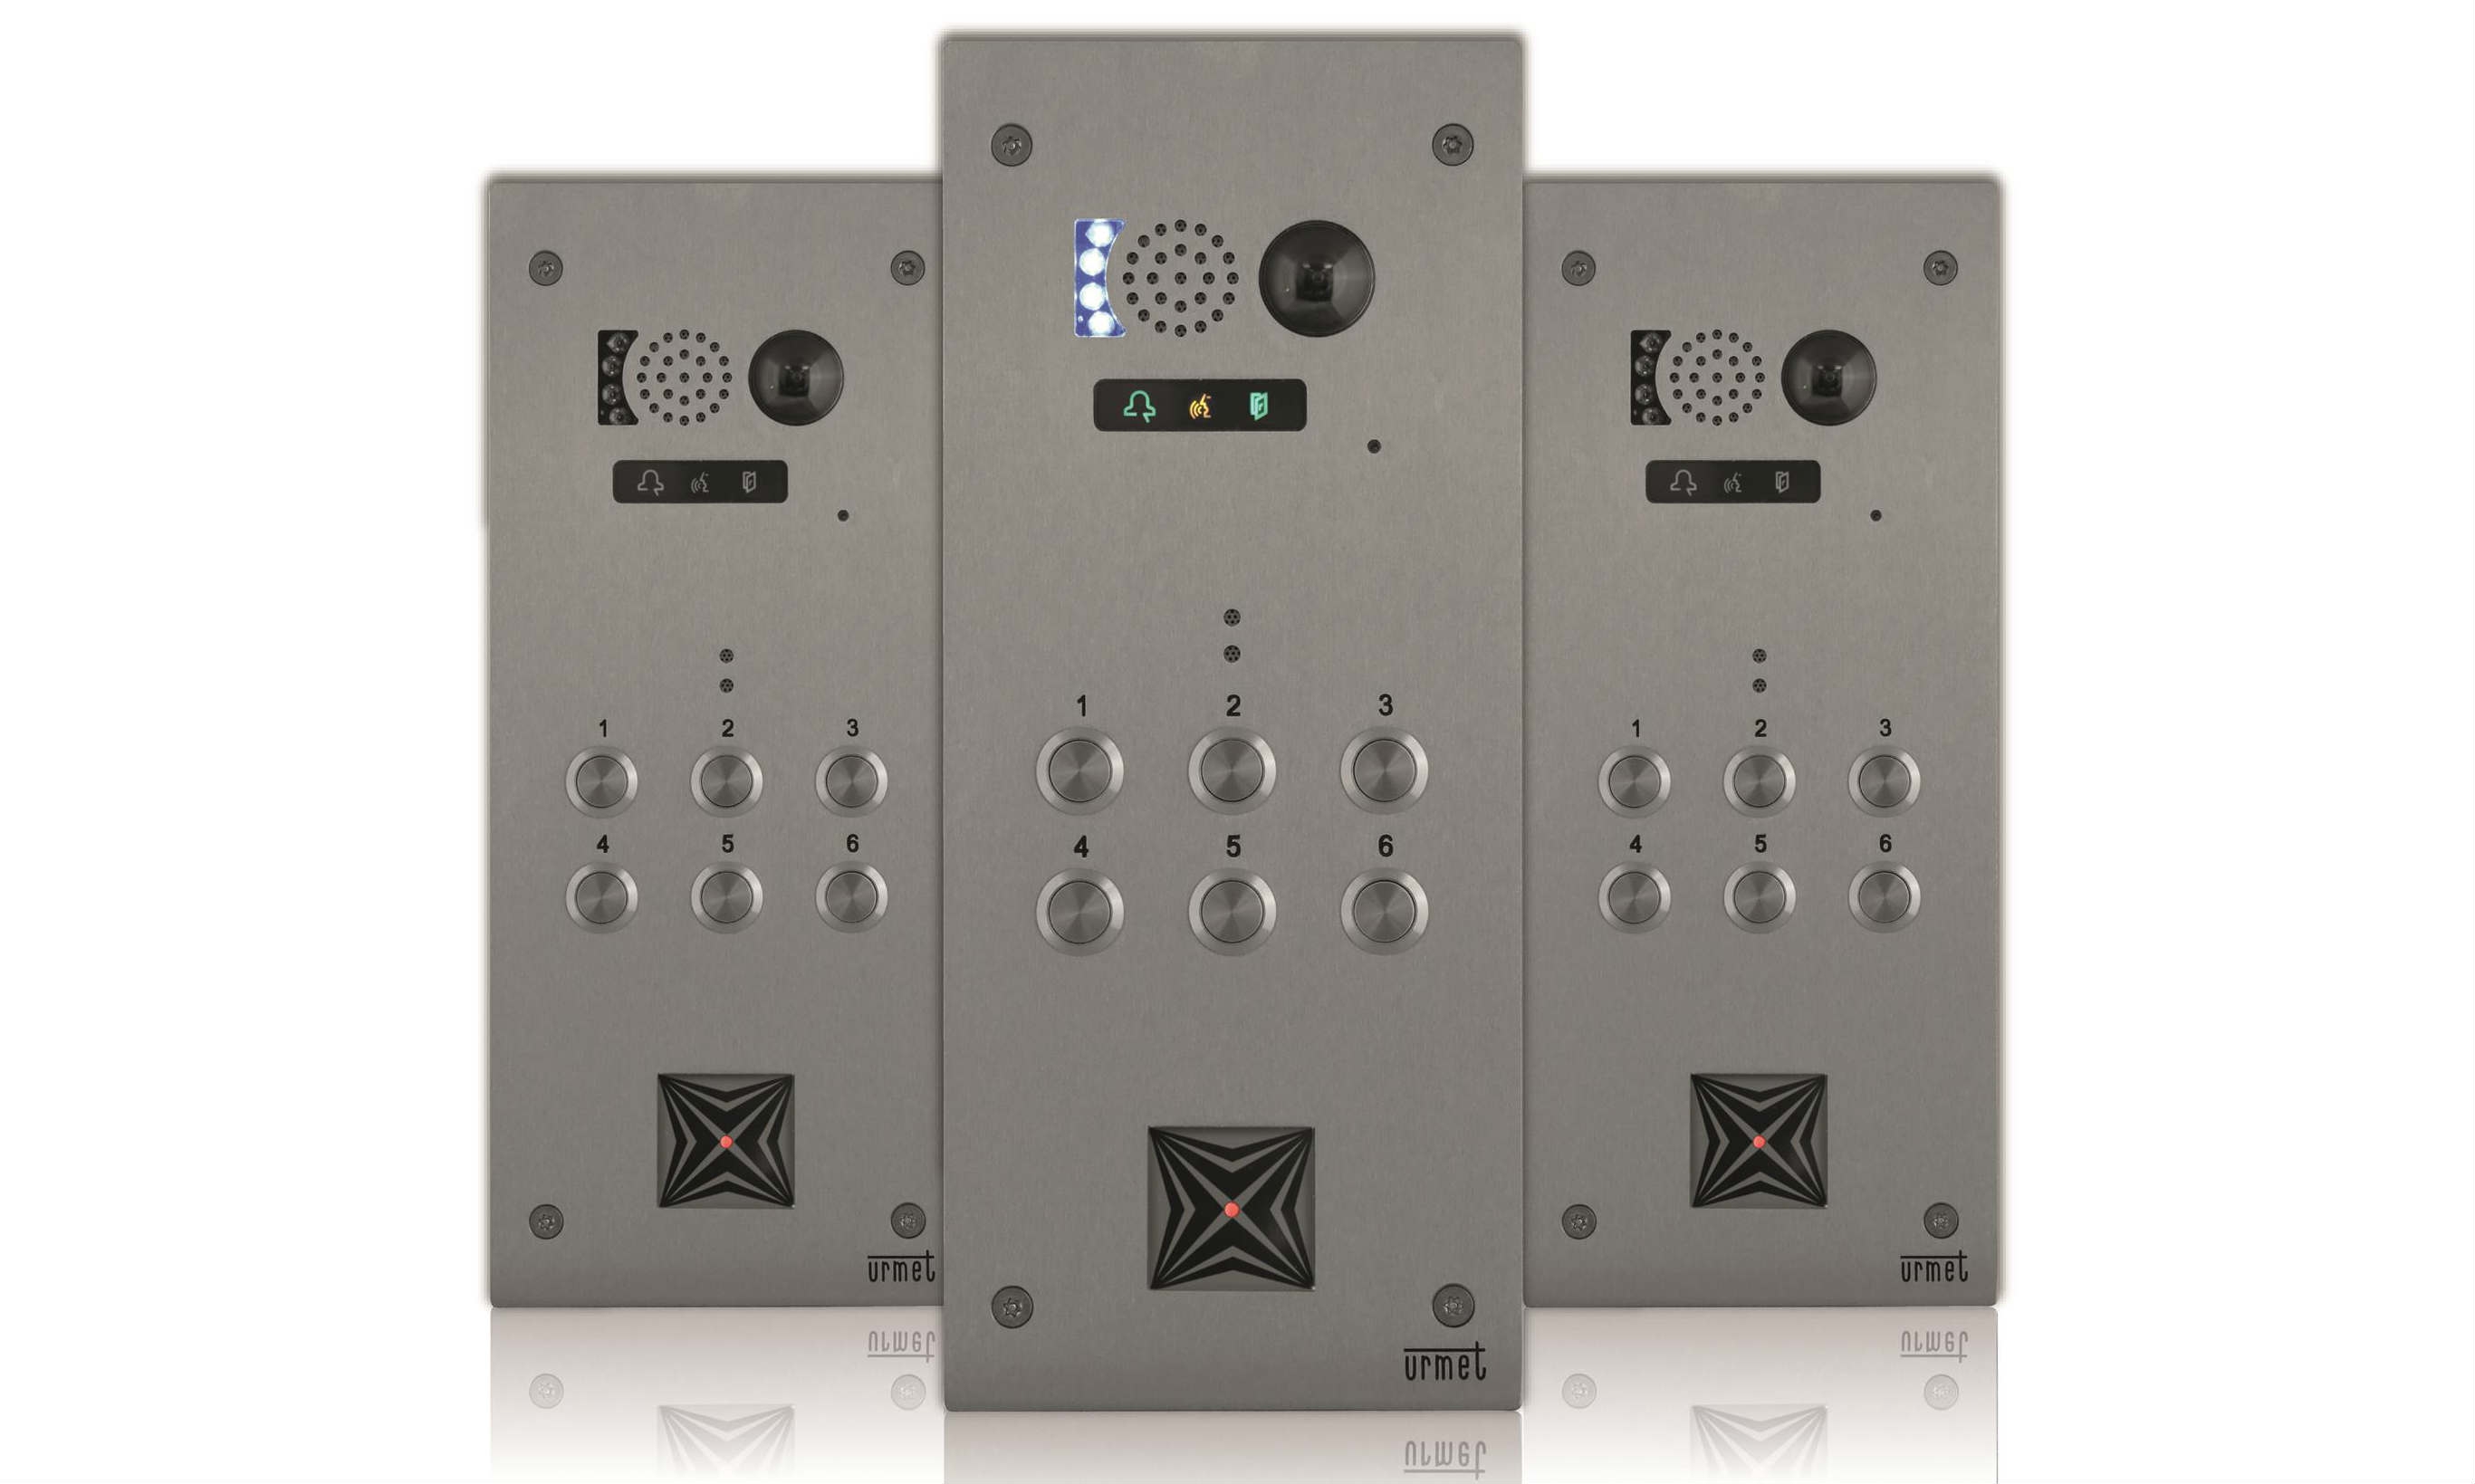 New stainless steel 2-wire video entry panels from Urmet